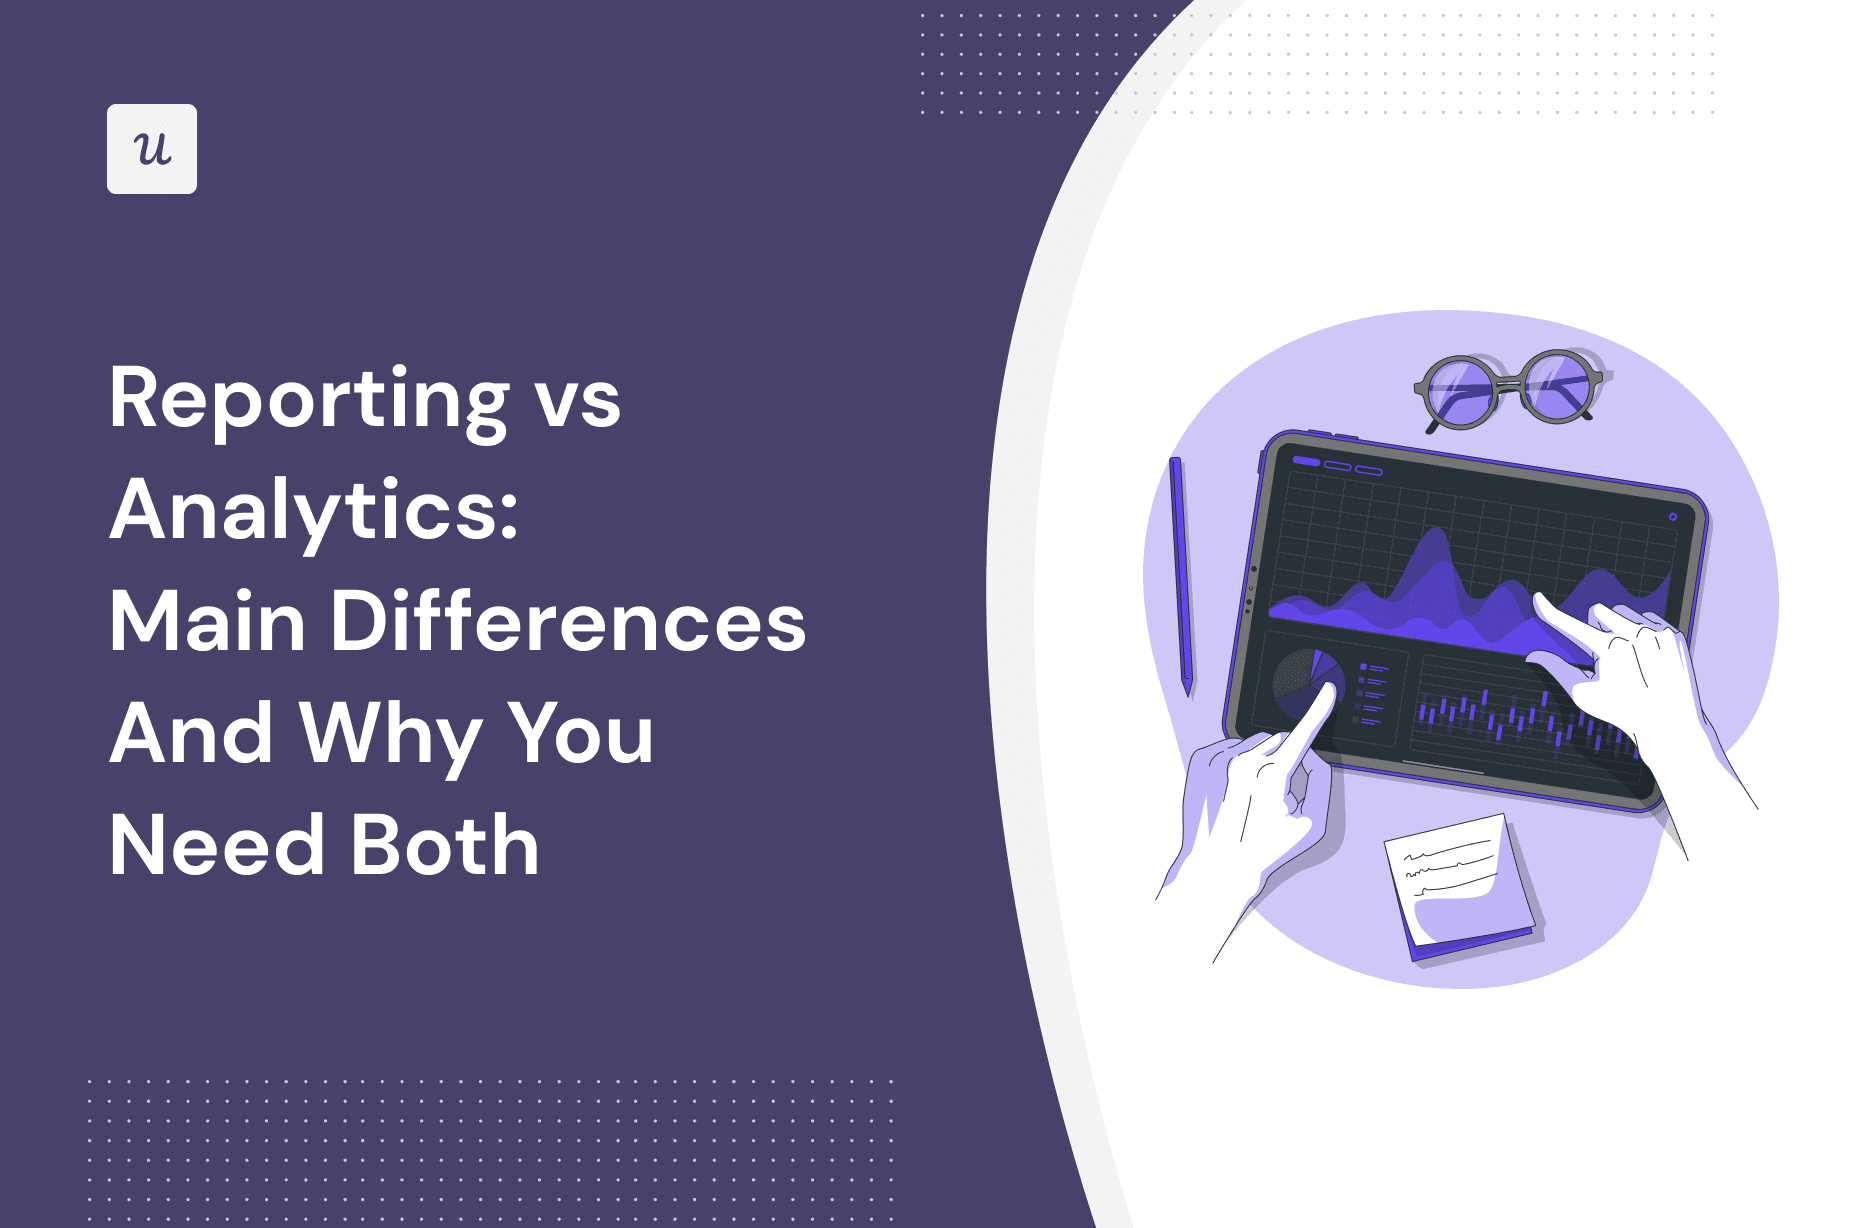 Reporting vs Analytics: Main Differences And Why You Need Both cover